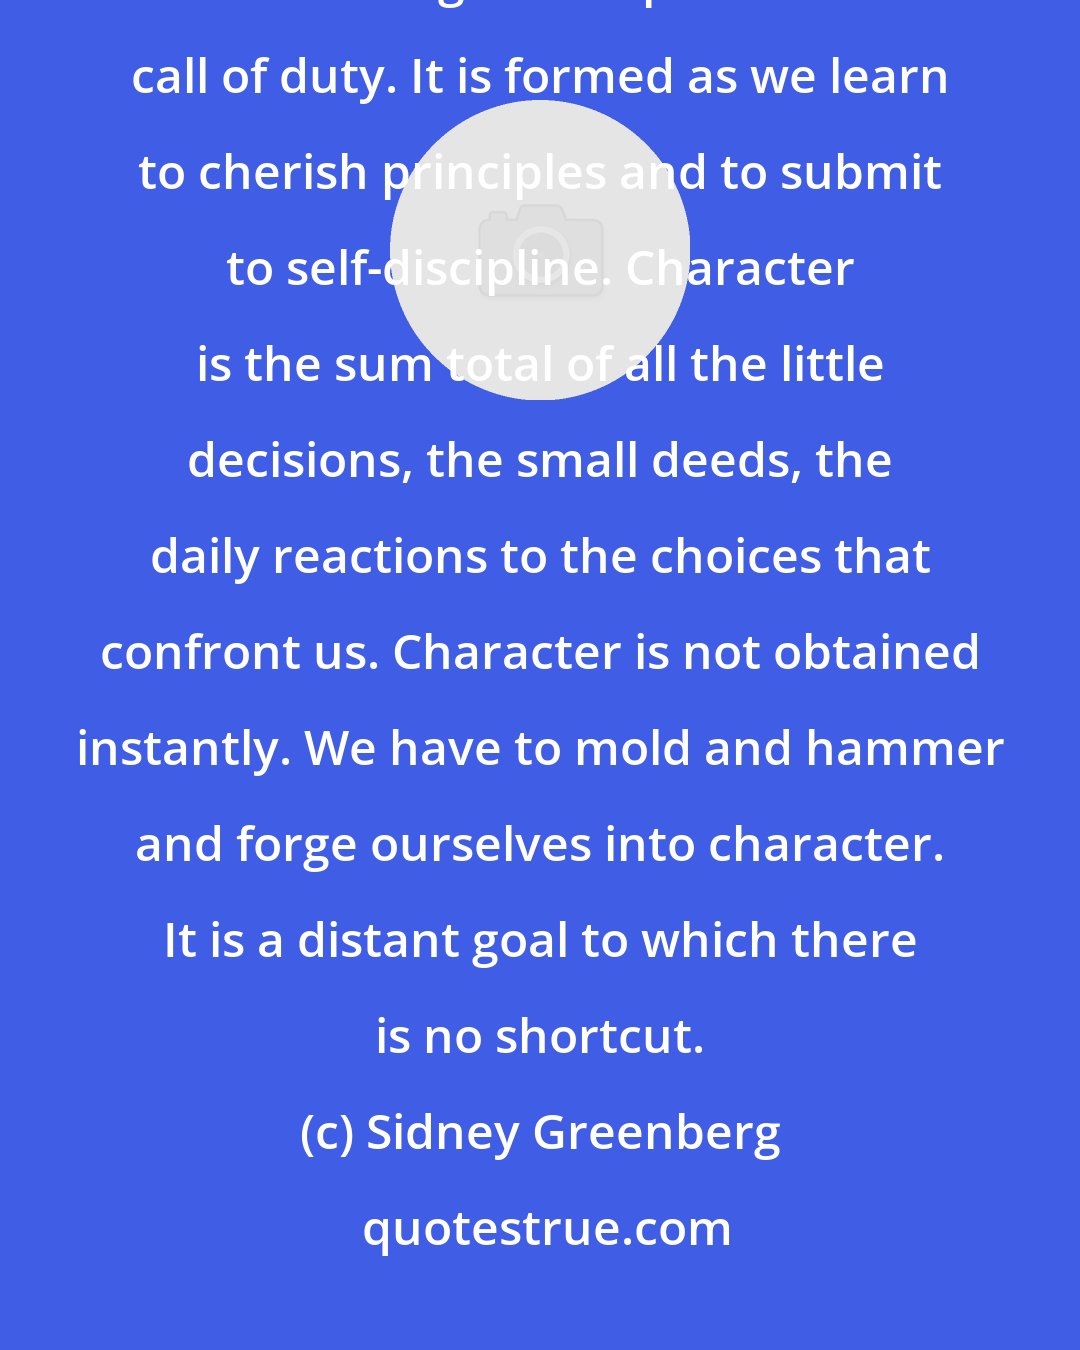 Sidney Greenberg: Character is distilled out of our daily confrontation with temptation, out of our regular response to the call of duty. It is formed as we learn to cherish principles and to submit to self-discipline. Character is the sum total of all the little decisions, the small deeds, the daily reactions to the choices that confront us. Character is not obtained instantly. We have to mold and hammer and forge ourselves into character. It is a distant goal to which there is no shortcut.